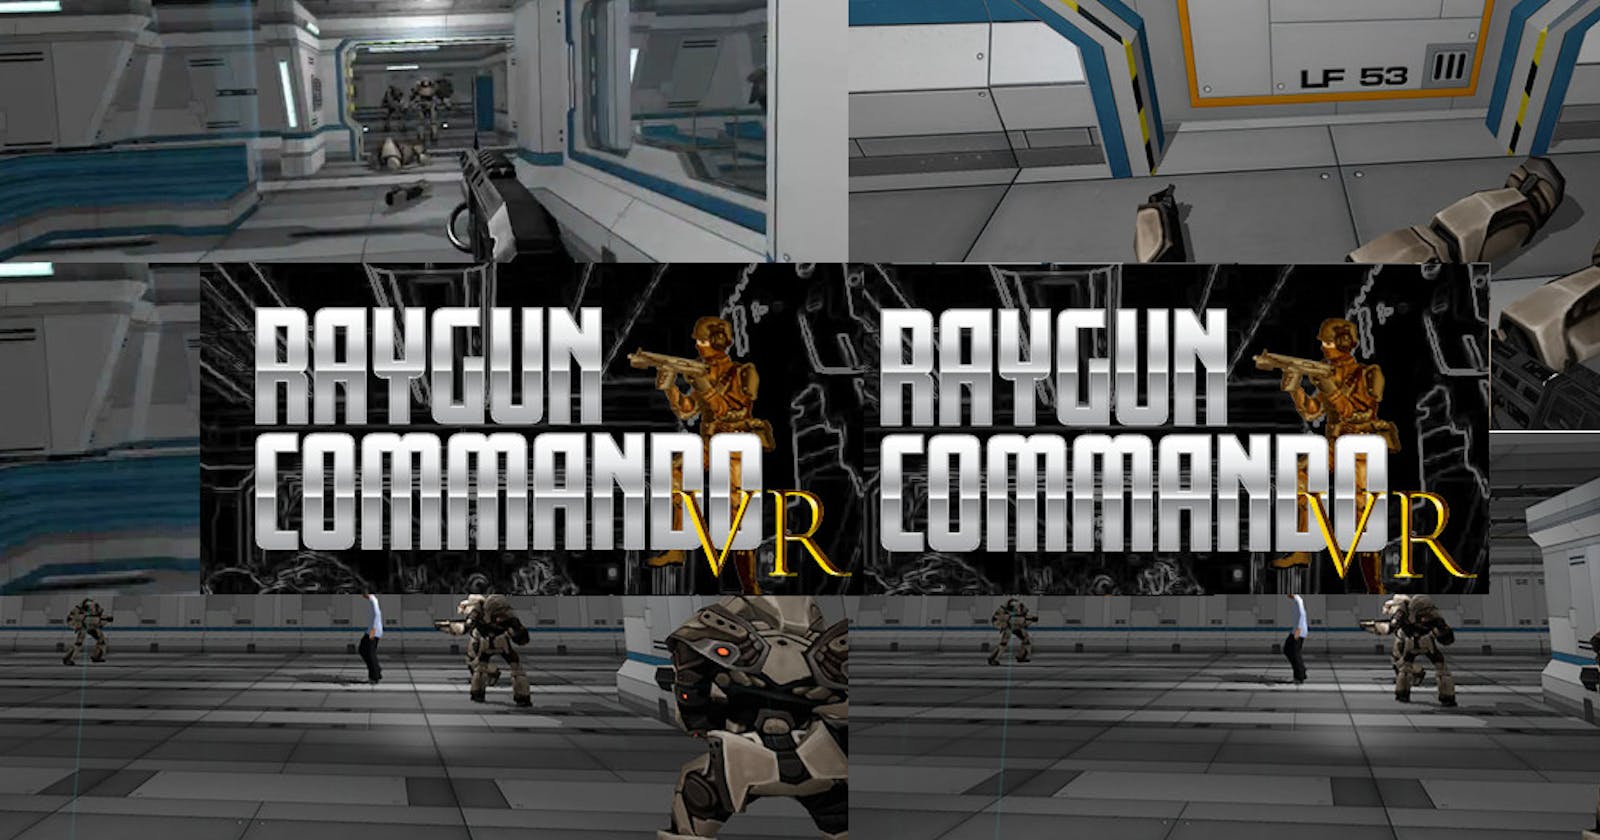 Analyzing A VR Experience( RAYGUN COMMANDO VR)